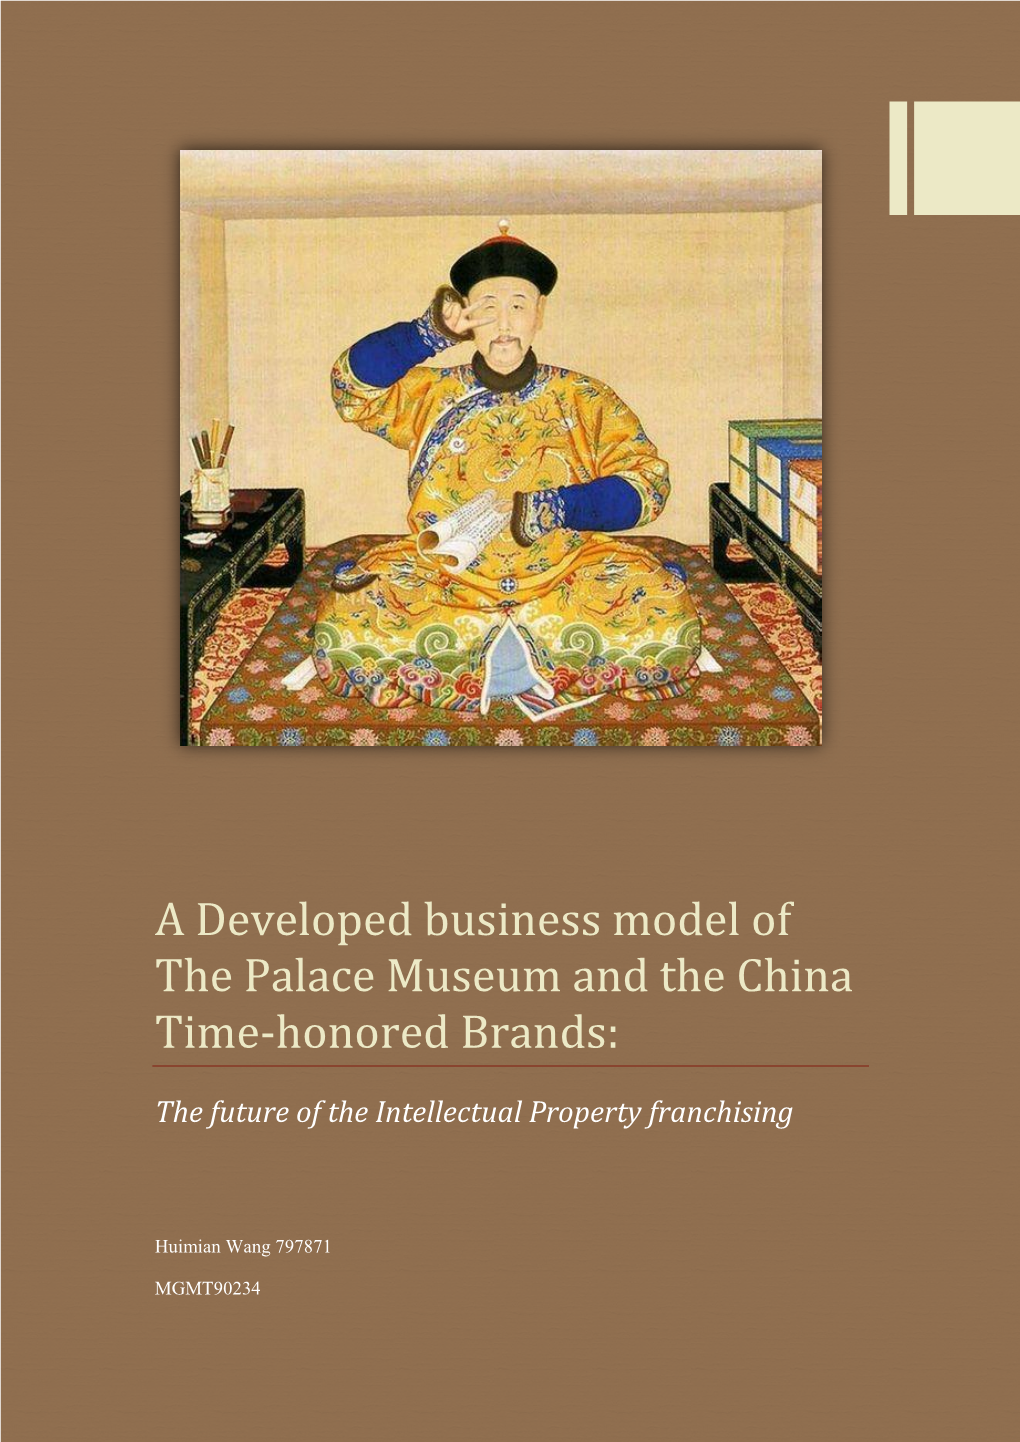 A Developed Business Model of the Palace Museum and the China Time-Honored Brands